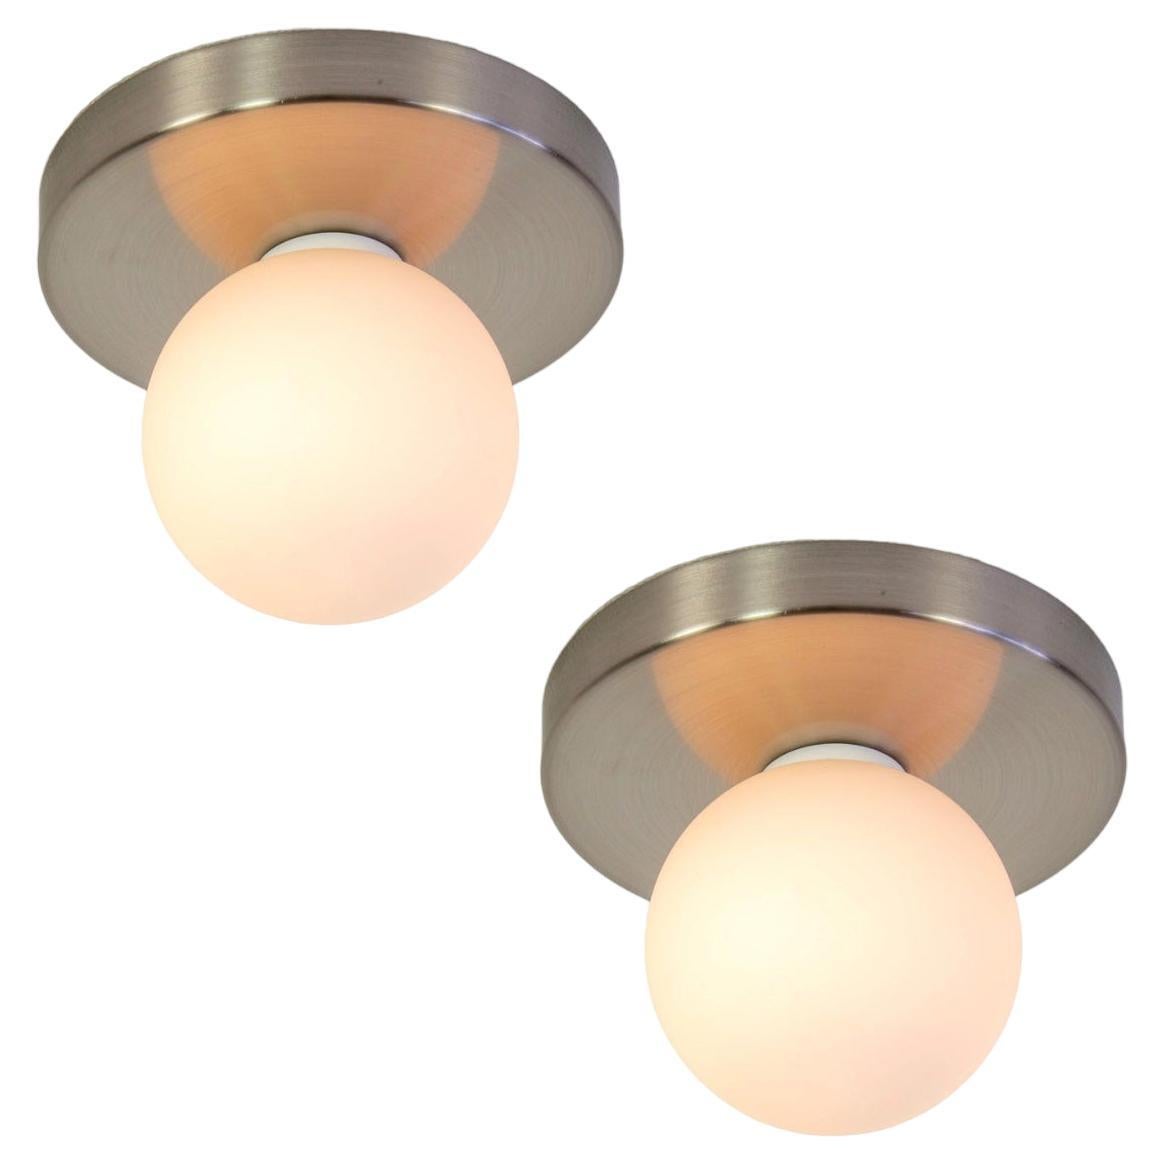 Pair of Globe Flush Mounts by Research.Lighting, Brushed Nickel, Made to Order For Sale